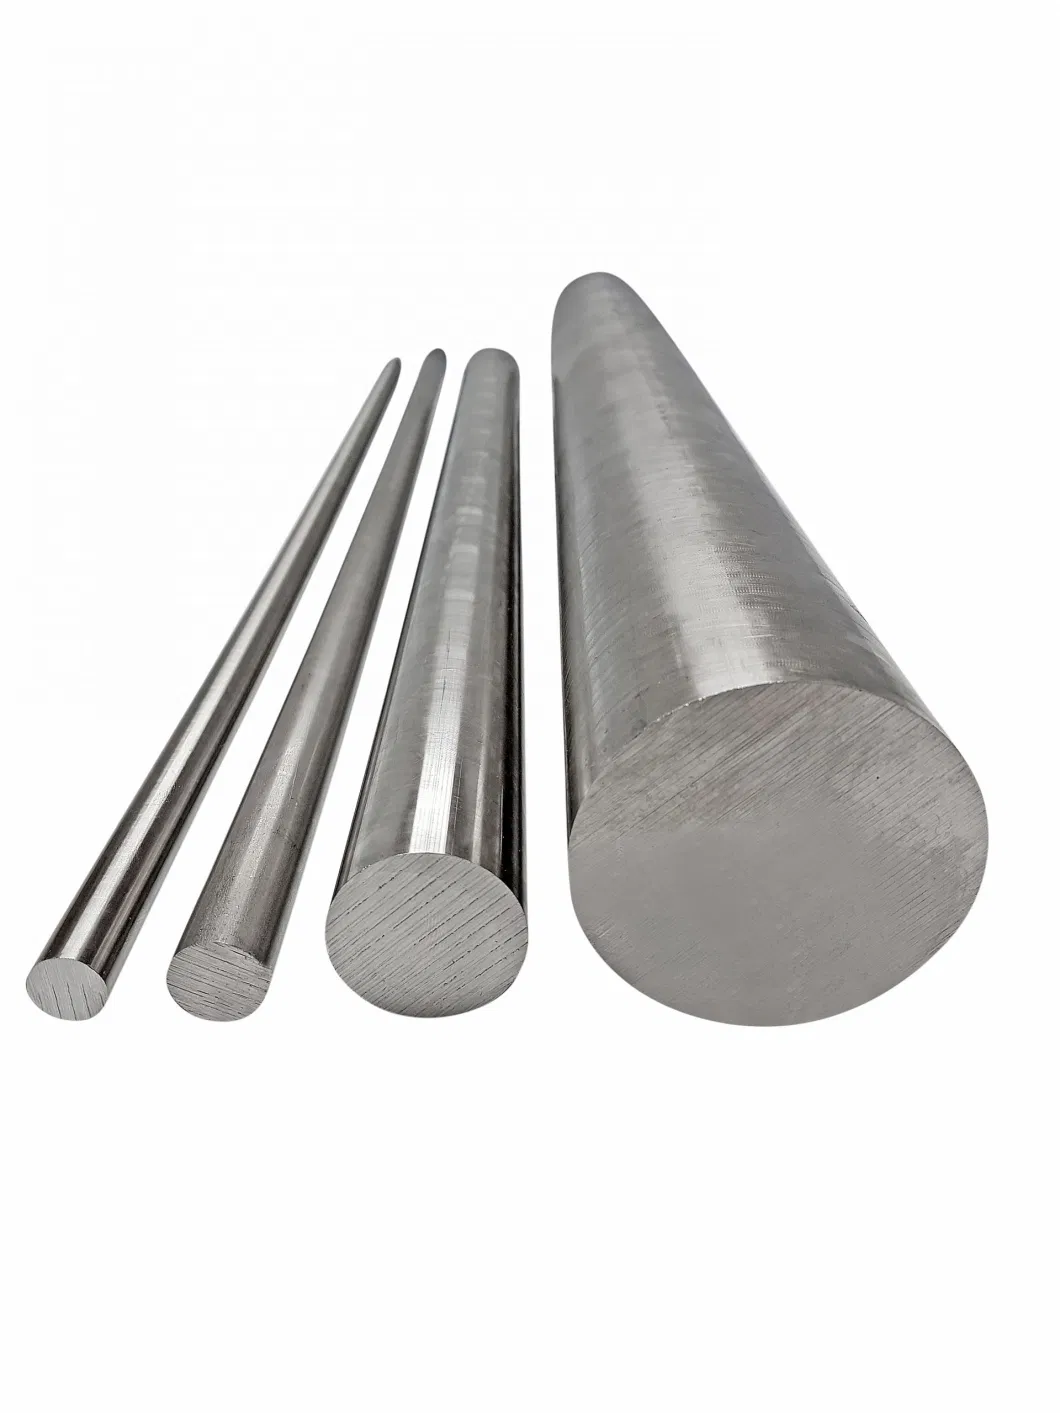 Low Price Stable Supply Corrosion Resistance 431 Stainless Steel Round Bar